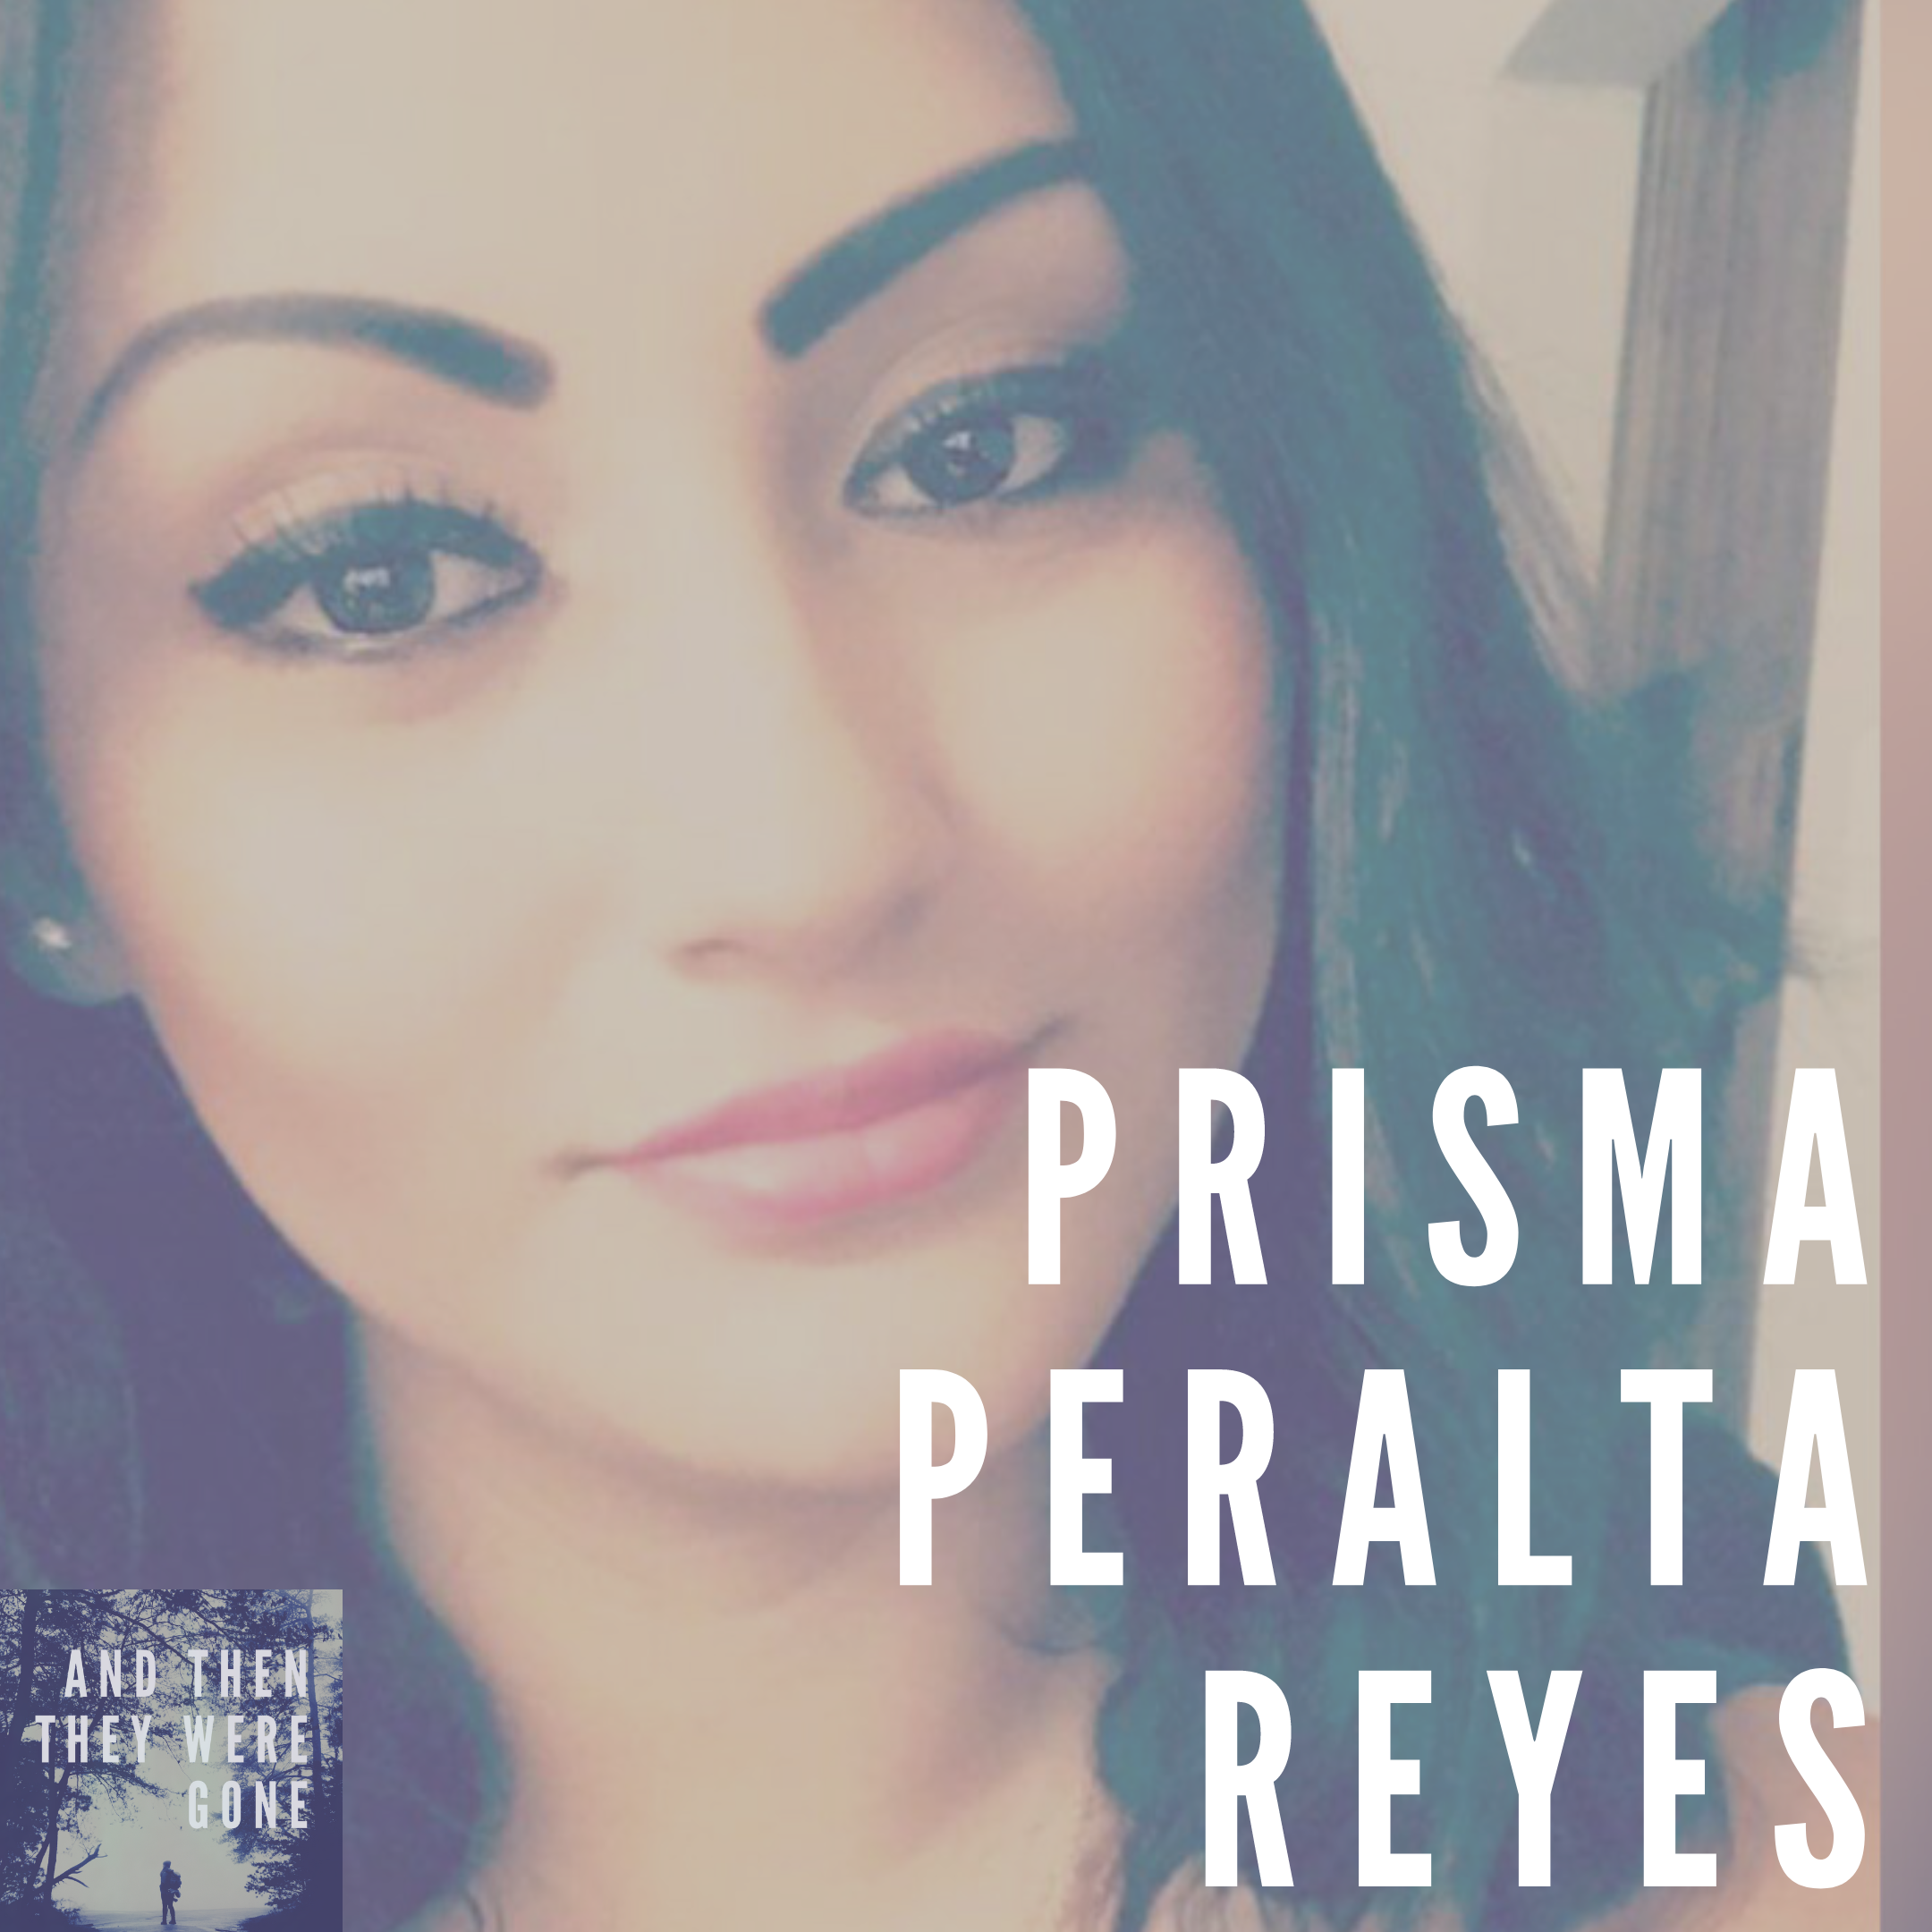 Prisma Peralta Reyes has been missing since April 17, 2019